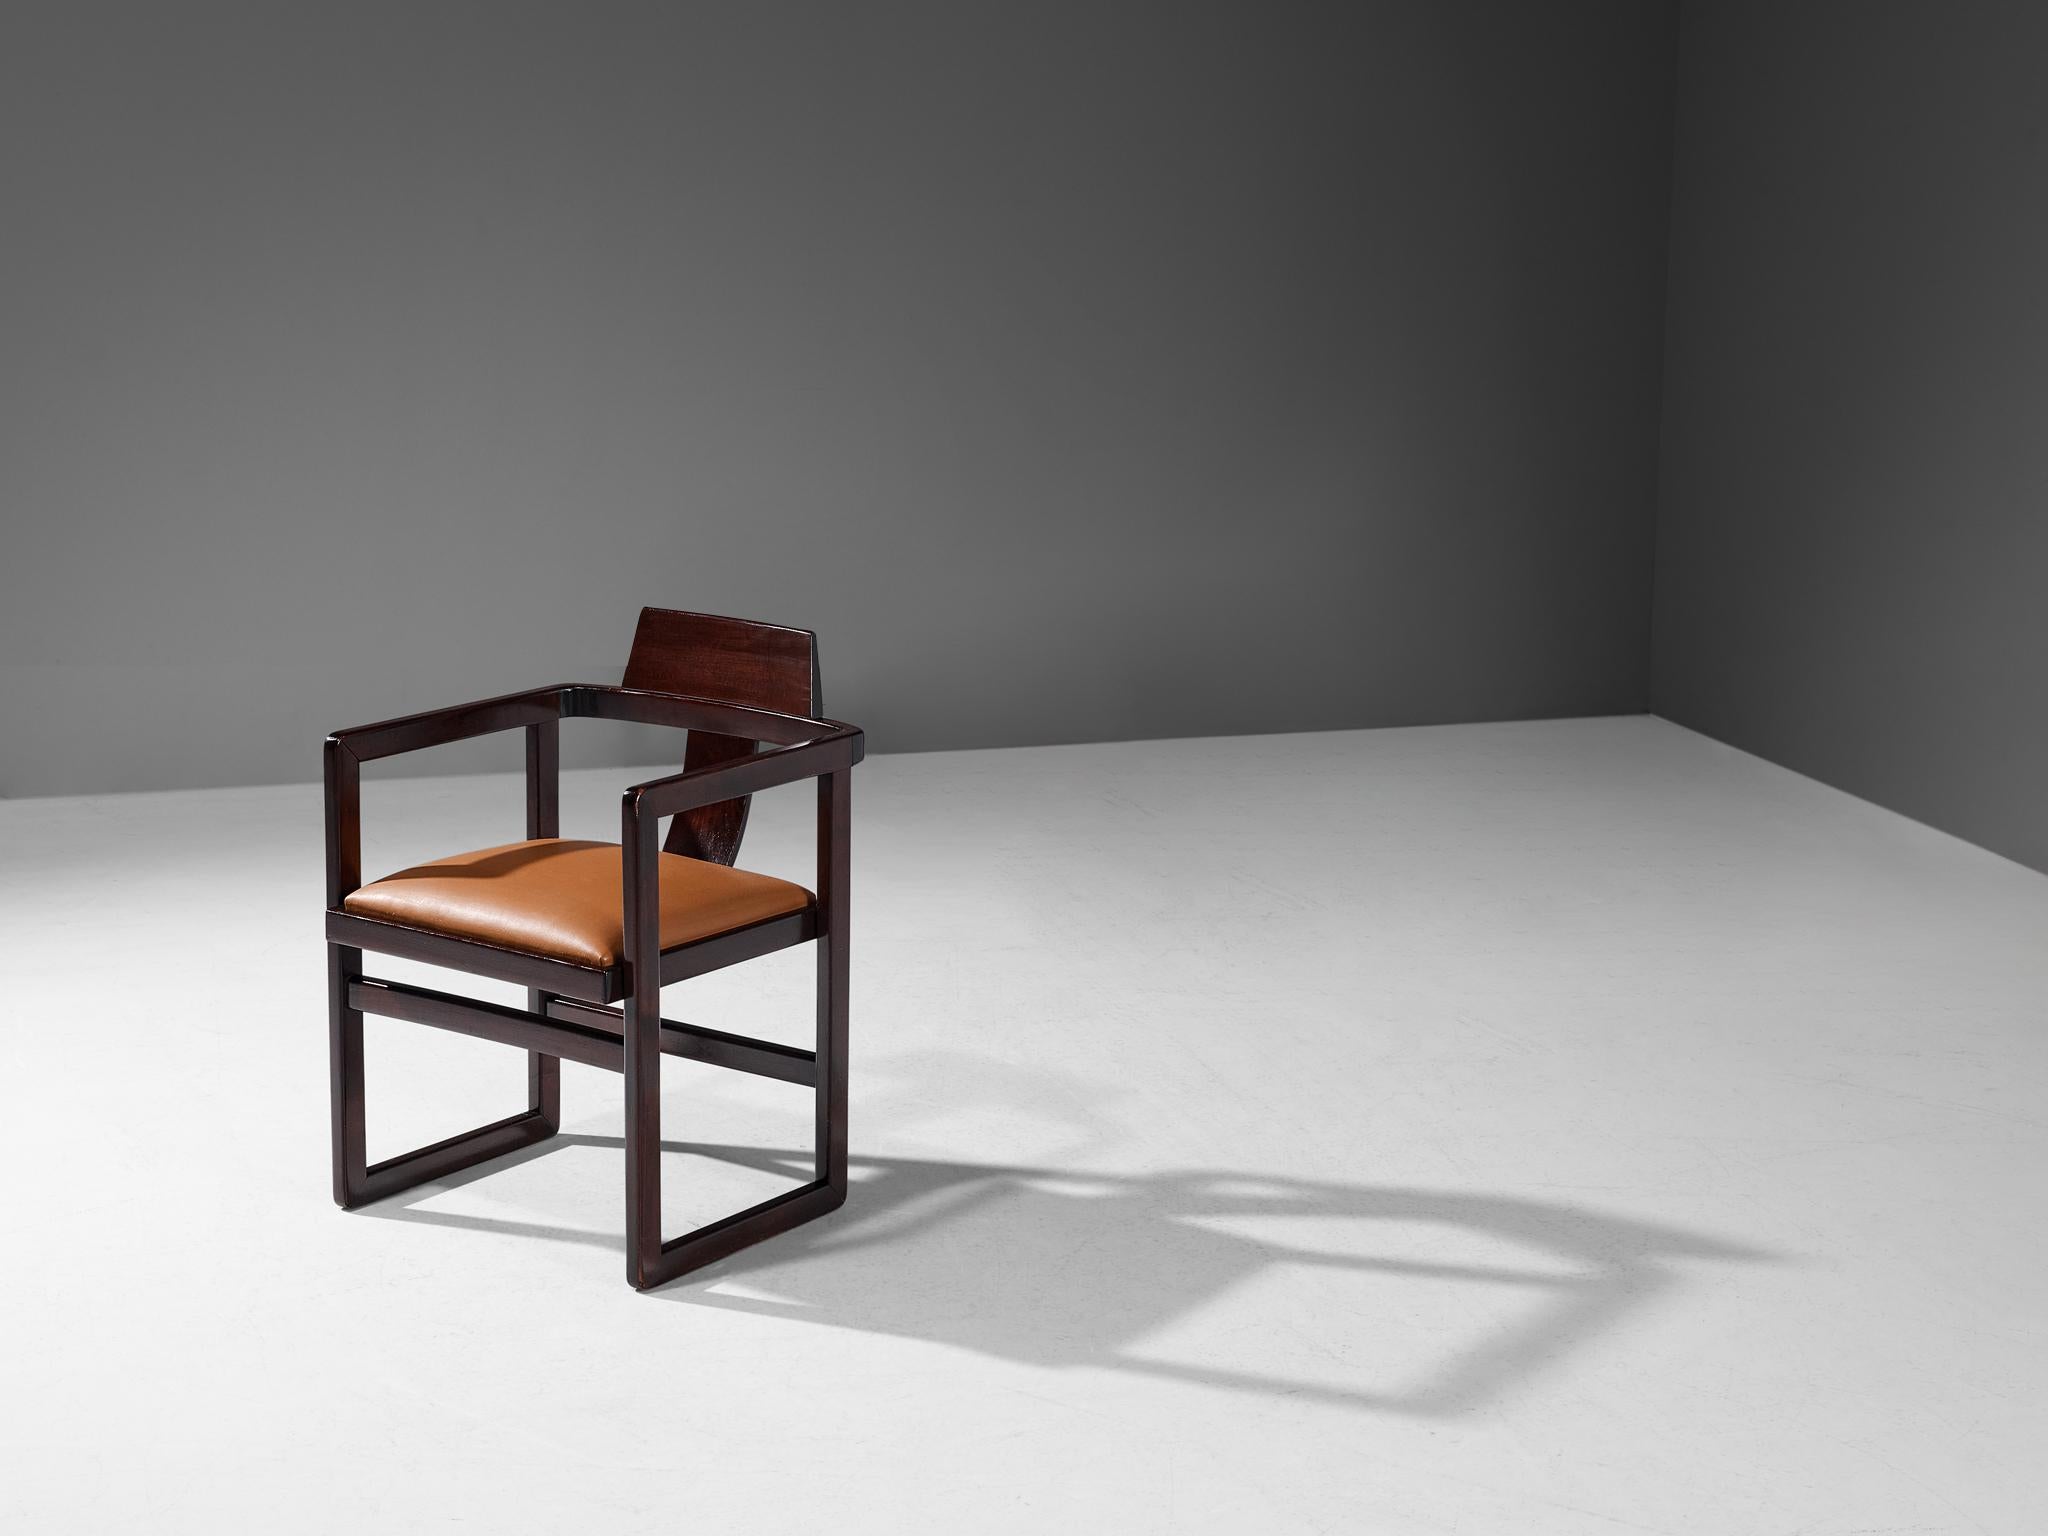 Armchair, stained wood, leatherette, Italy, 1970s

Simplistic yet elegant Italian armchair. Straight geometrical lines are prominent in the execution, for example to be seen in its dark red stained wooden frame. An elegant feature are the rounded